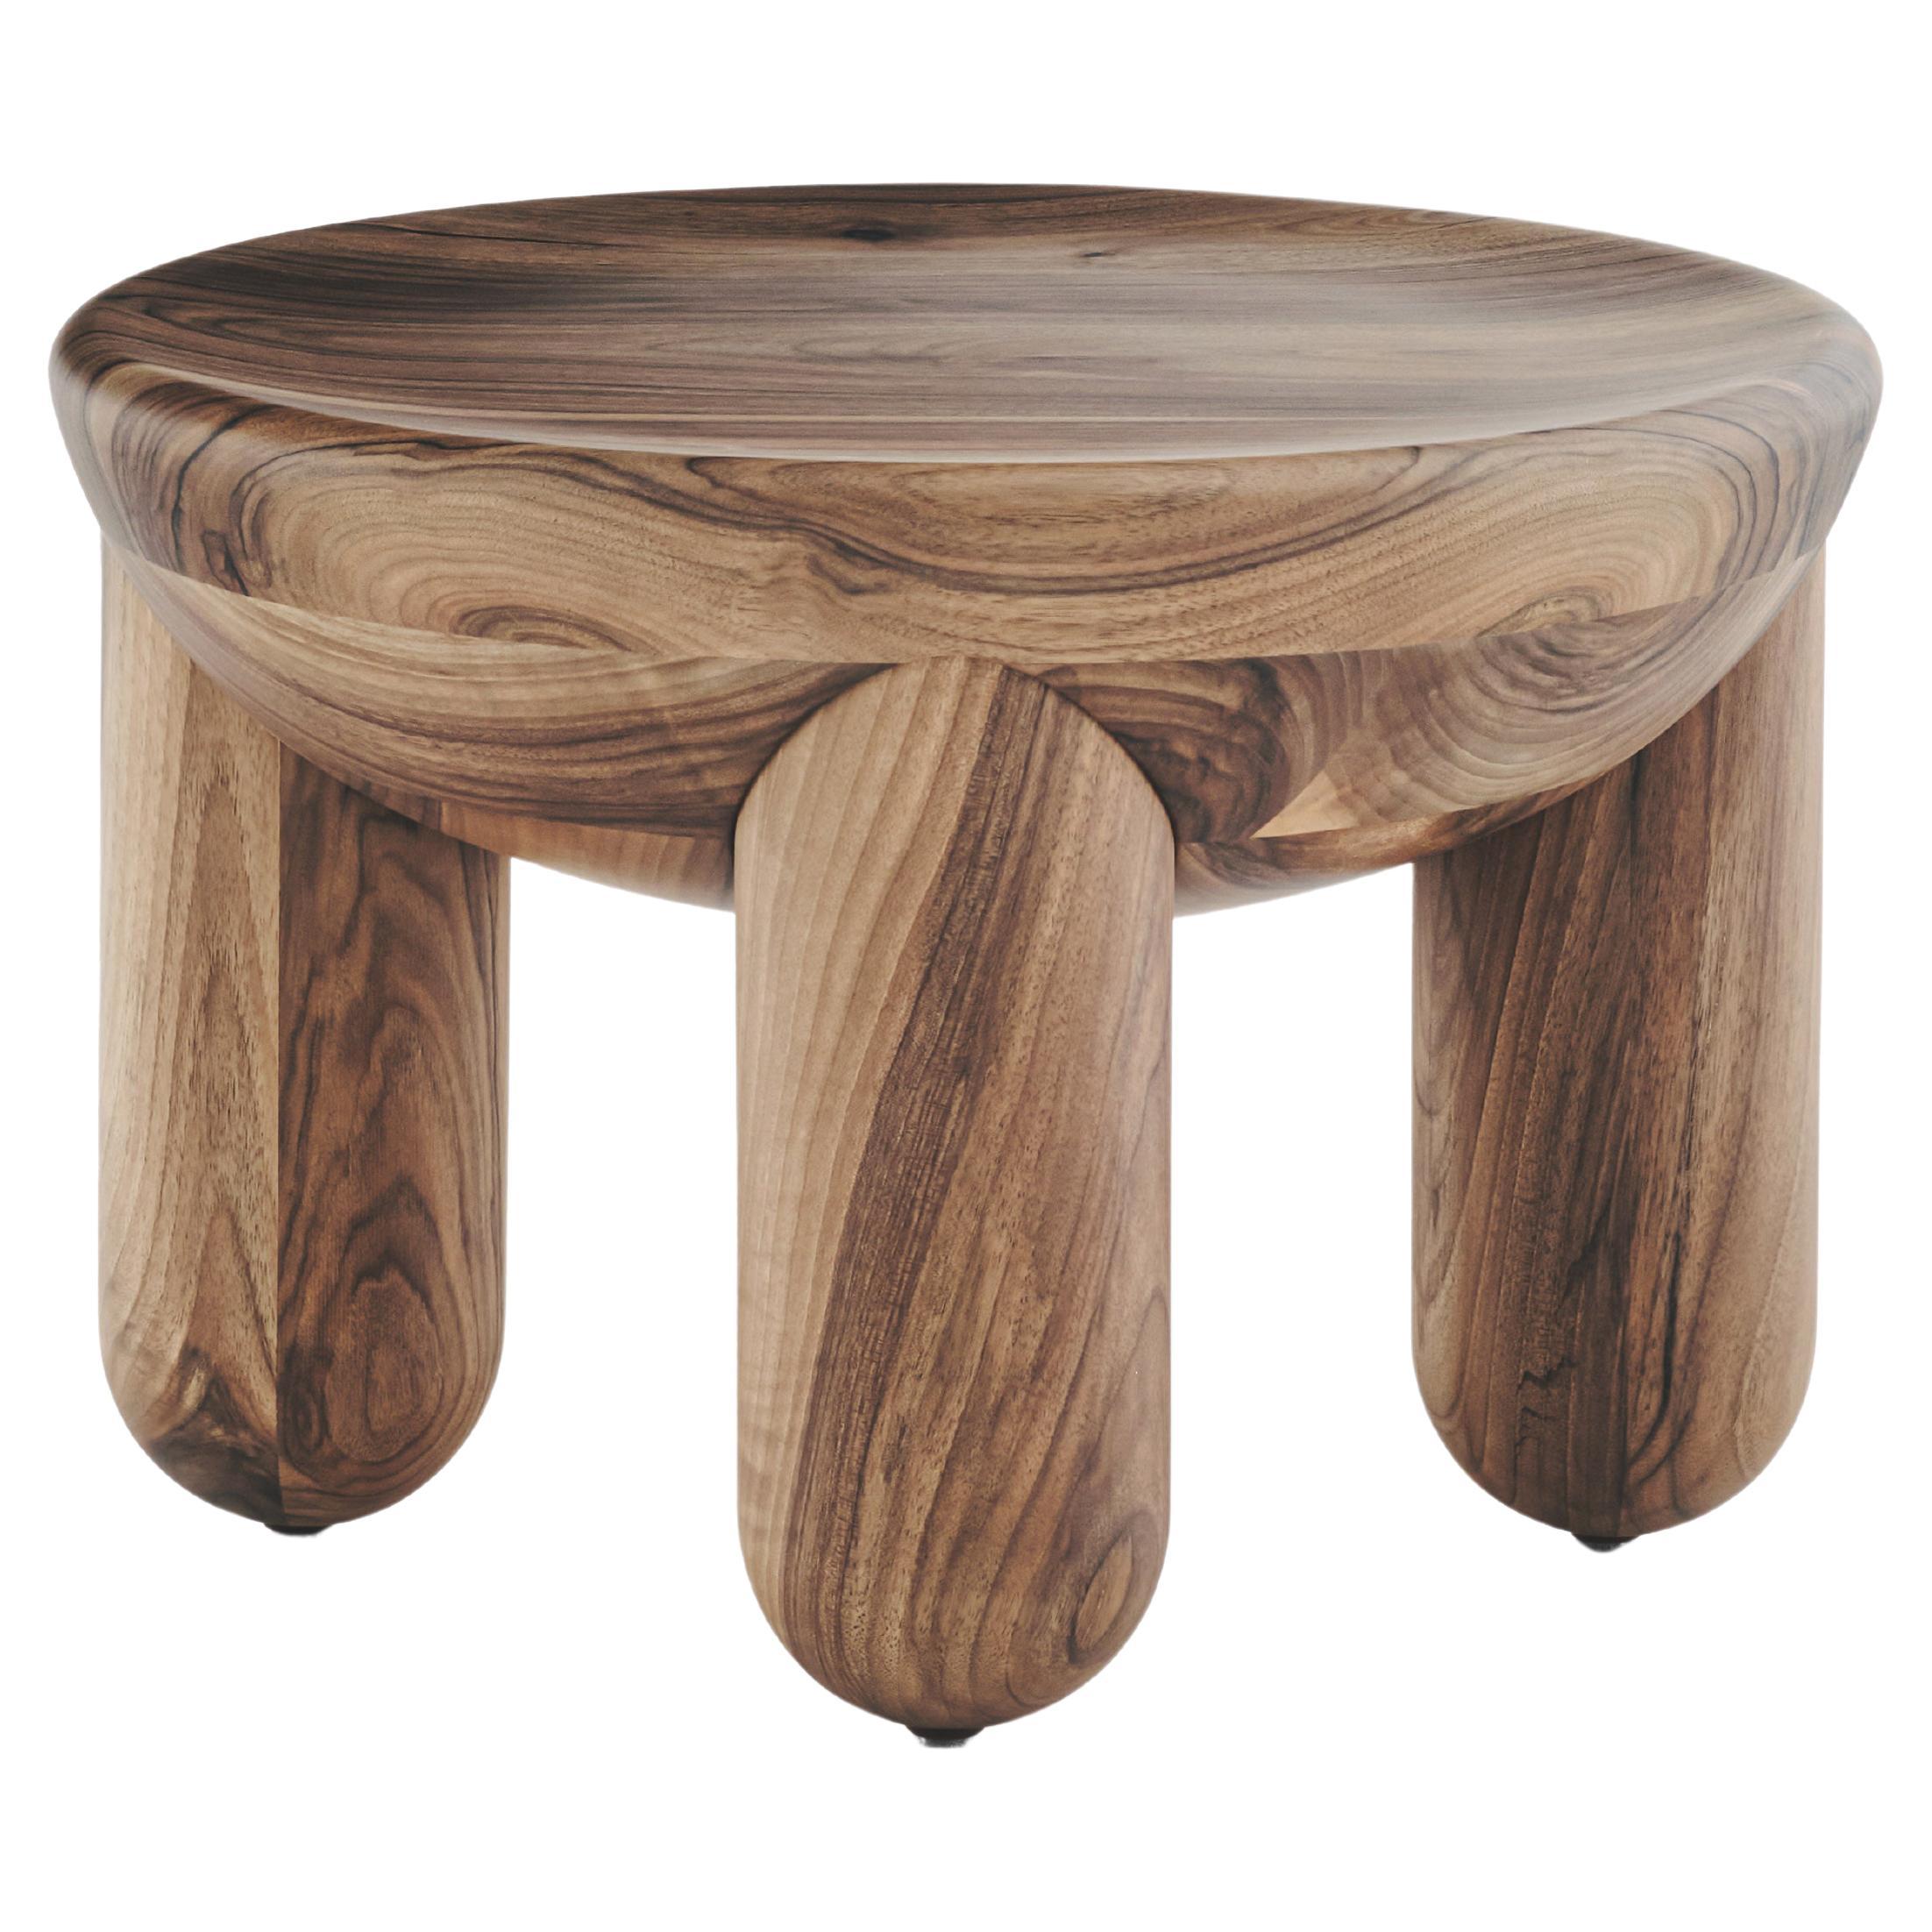 Contemporary Coffee or Side Table 'Freyja 2' by Noom, Walnut